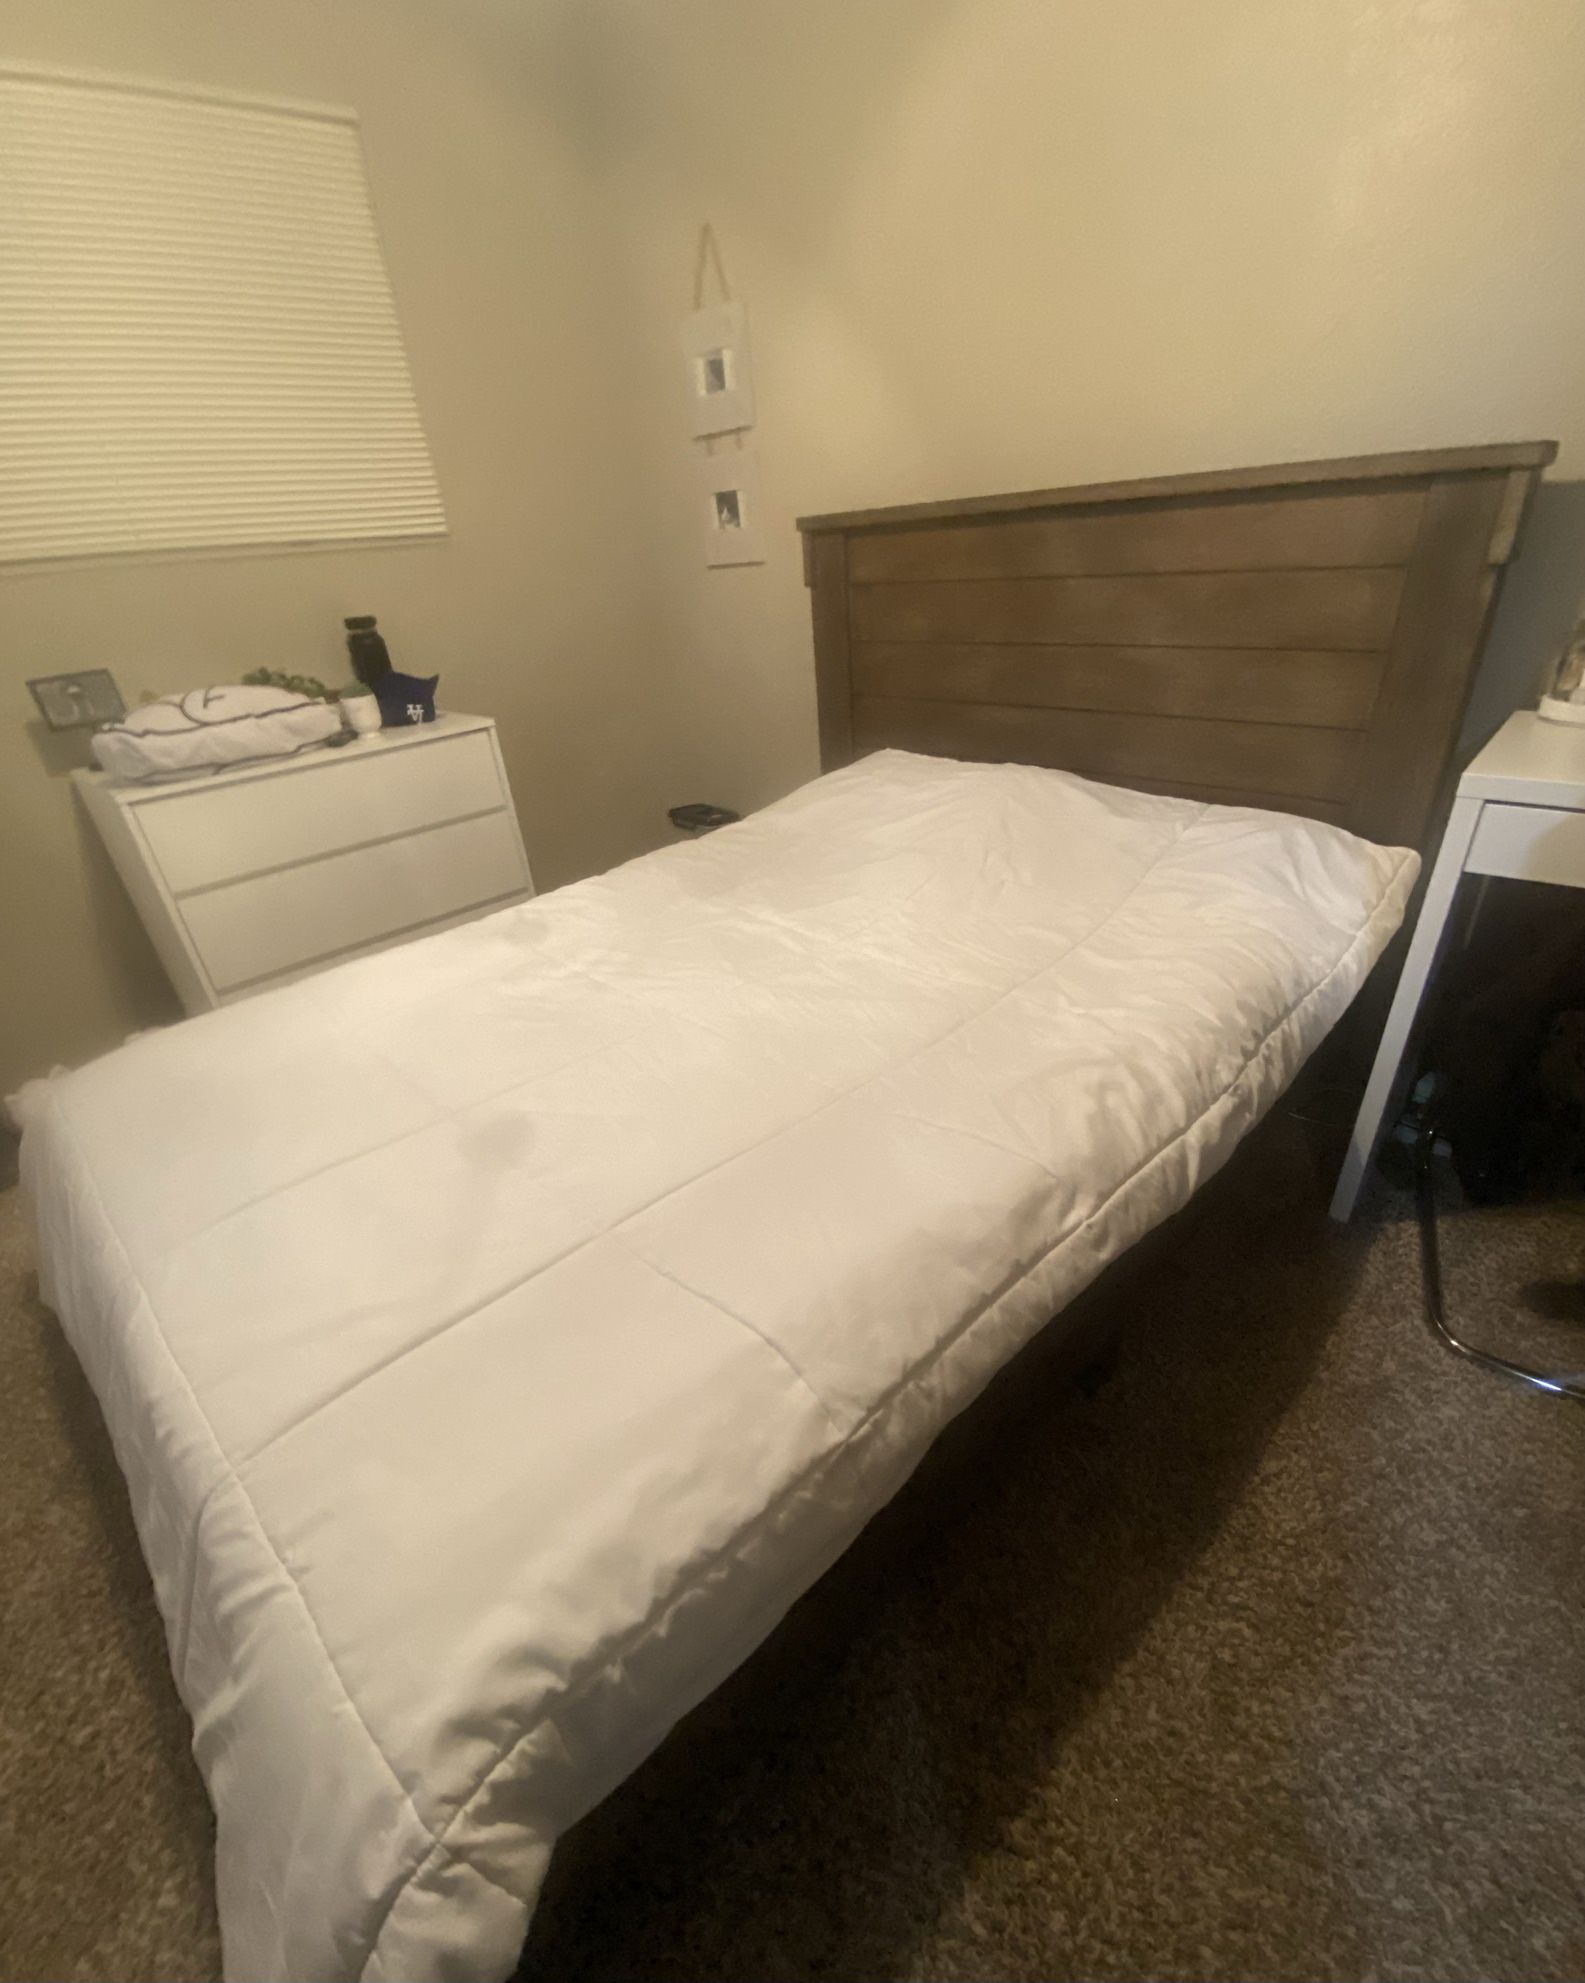 NEW Full Bed Frame and Mattress 